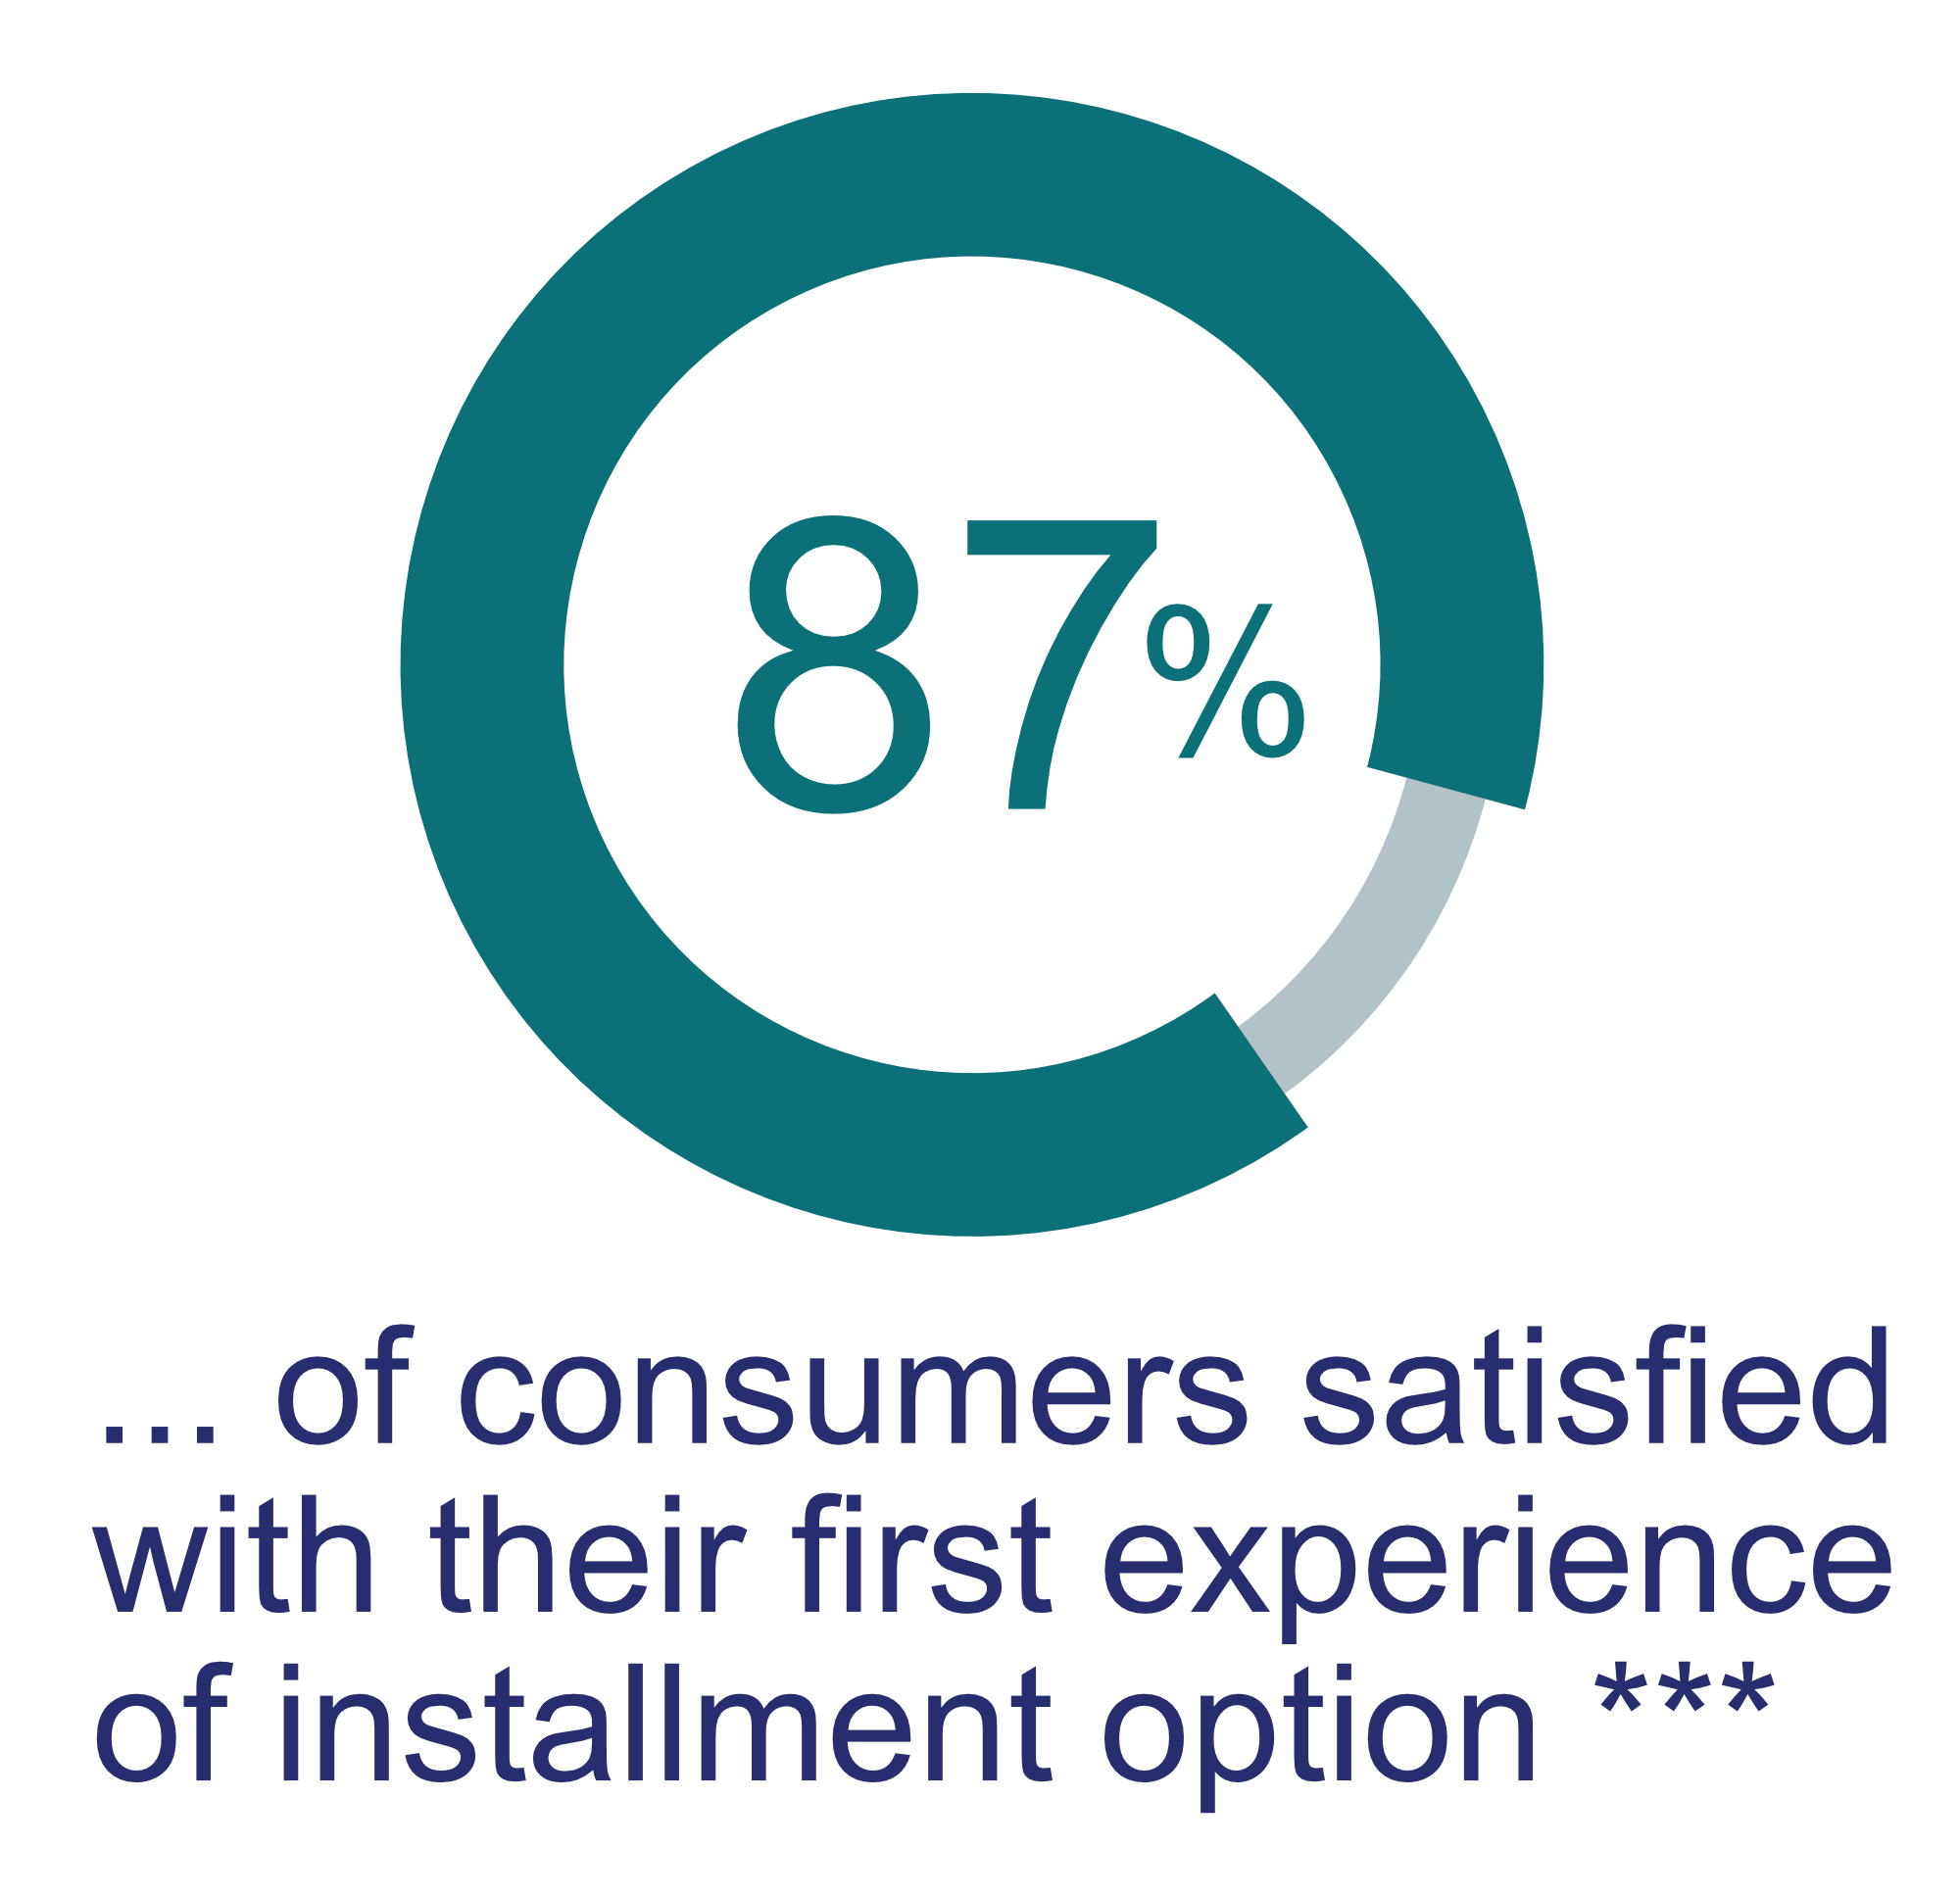 87% of consumers satisfied with their first experience of installment option